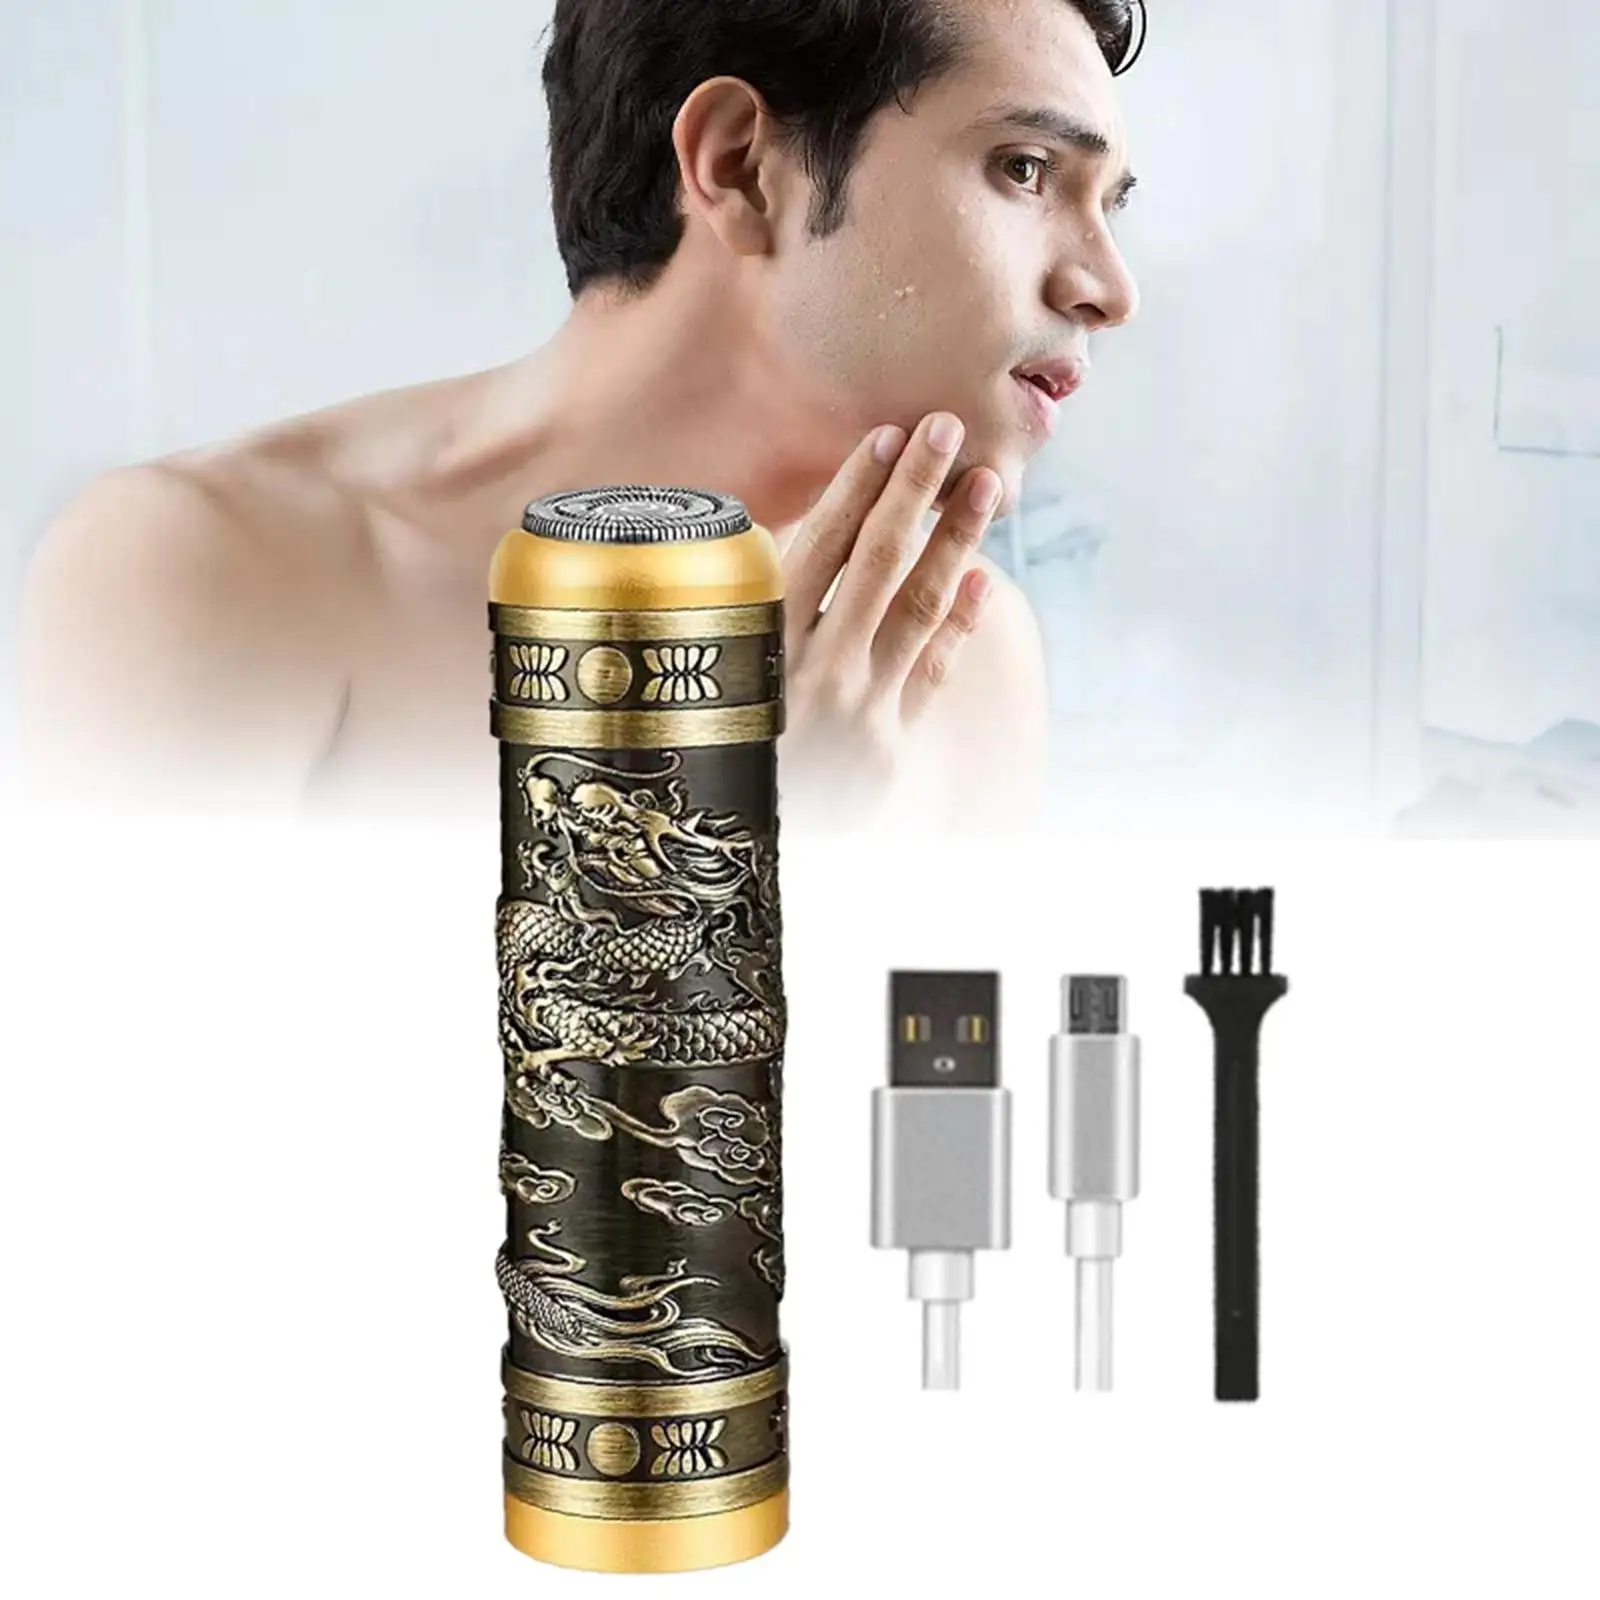 Compact Mini Electric Razor Small Face Shaver Beard Trimmer Wet and Dry Use Shaving Machine Rechargeable Shaver for Travel Trip